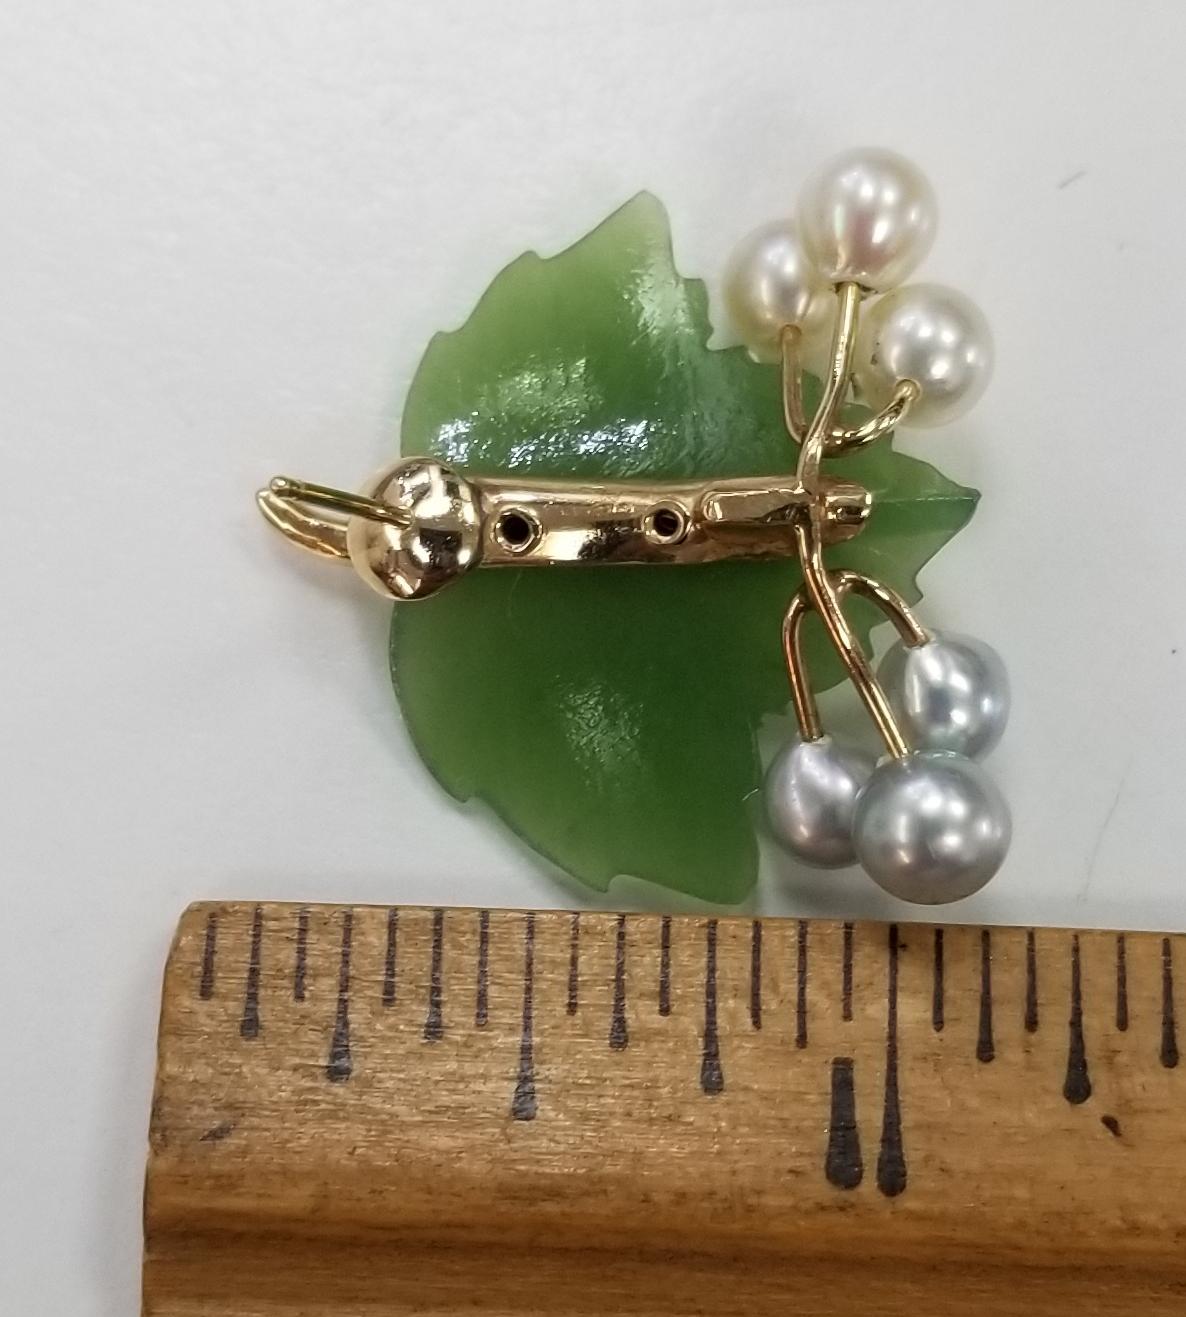 Midcentury Vintage Earrings Features Carved Nephrite and Pearls in a 14k Gold In Excellent Condition For Sale In Los Angeles, CA